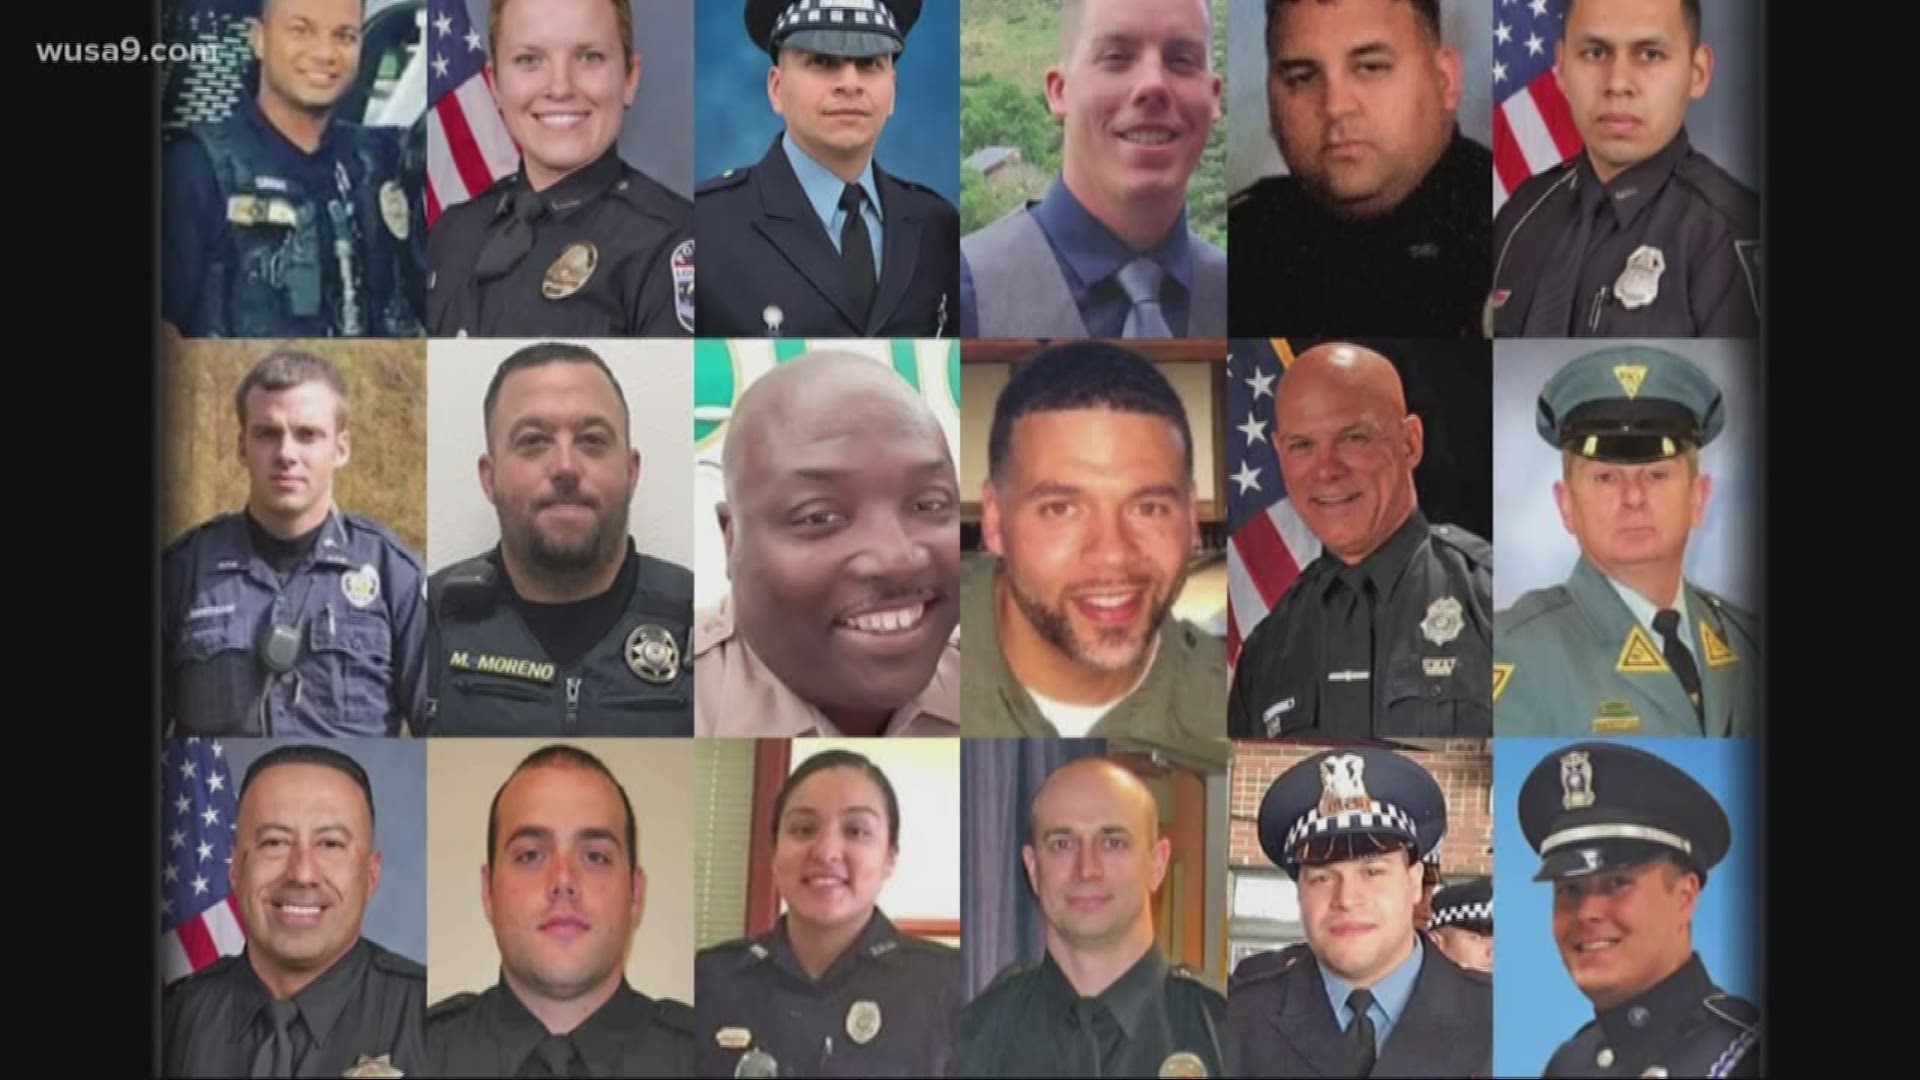 144 officers nationwide have died in the line of duty this year, a 12 percent increase from 2017.